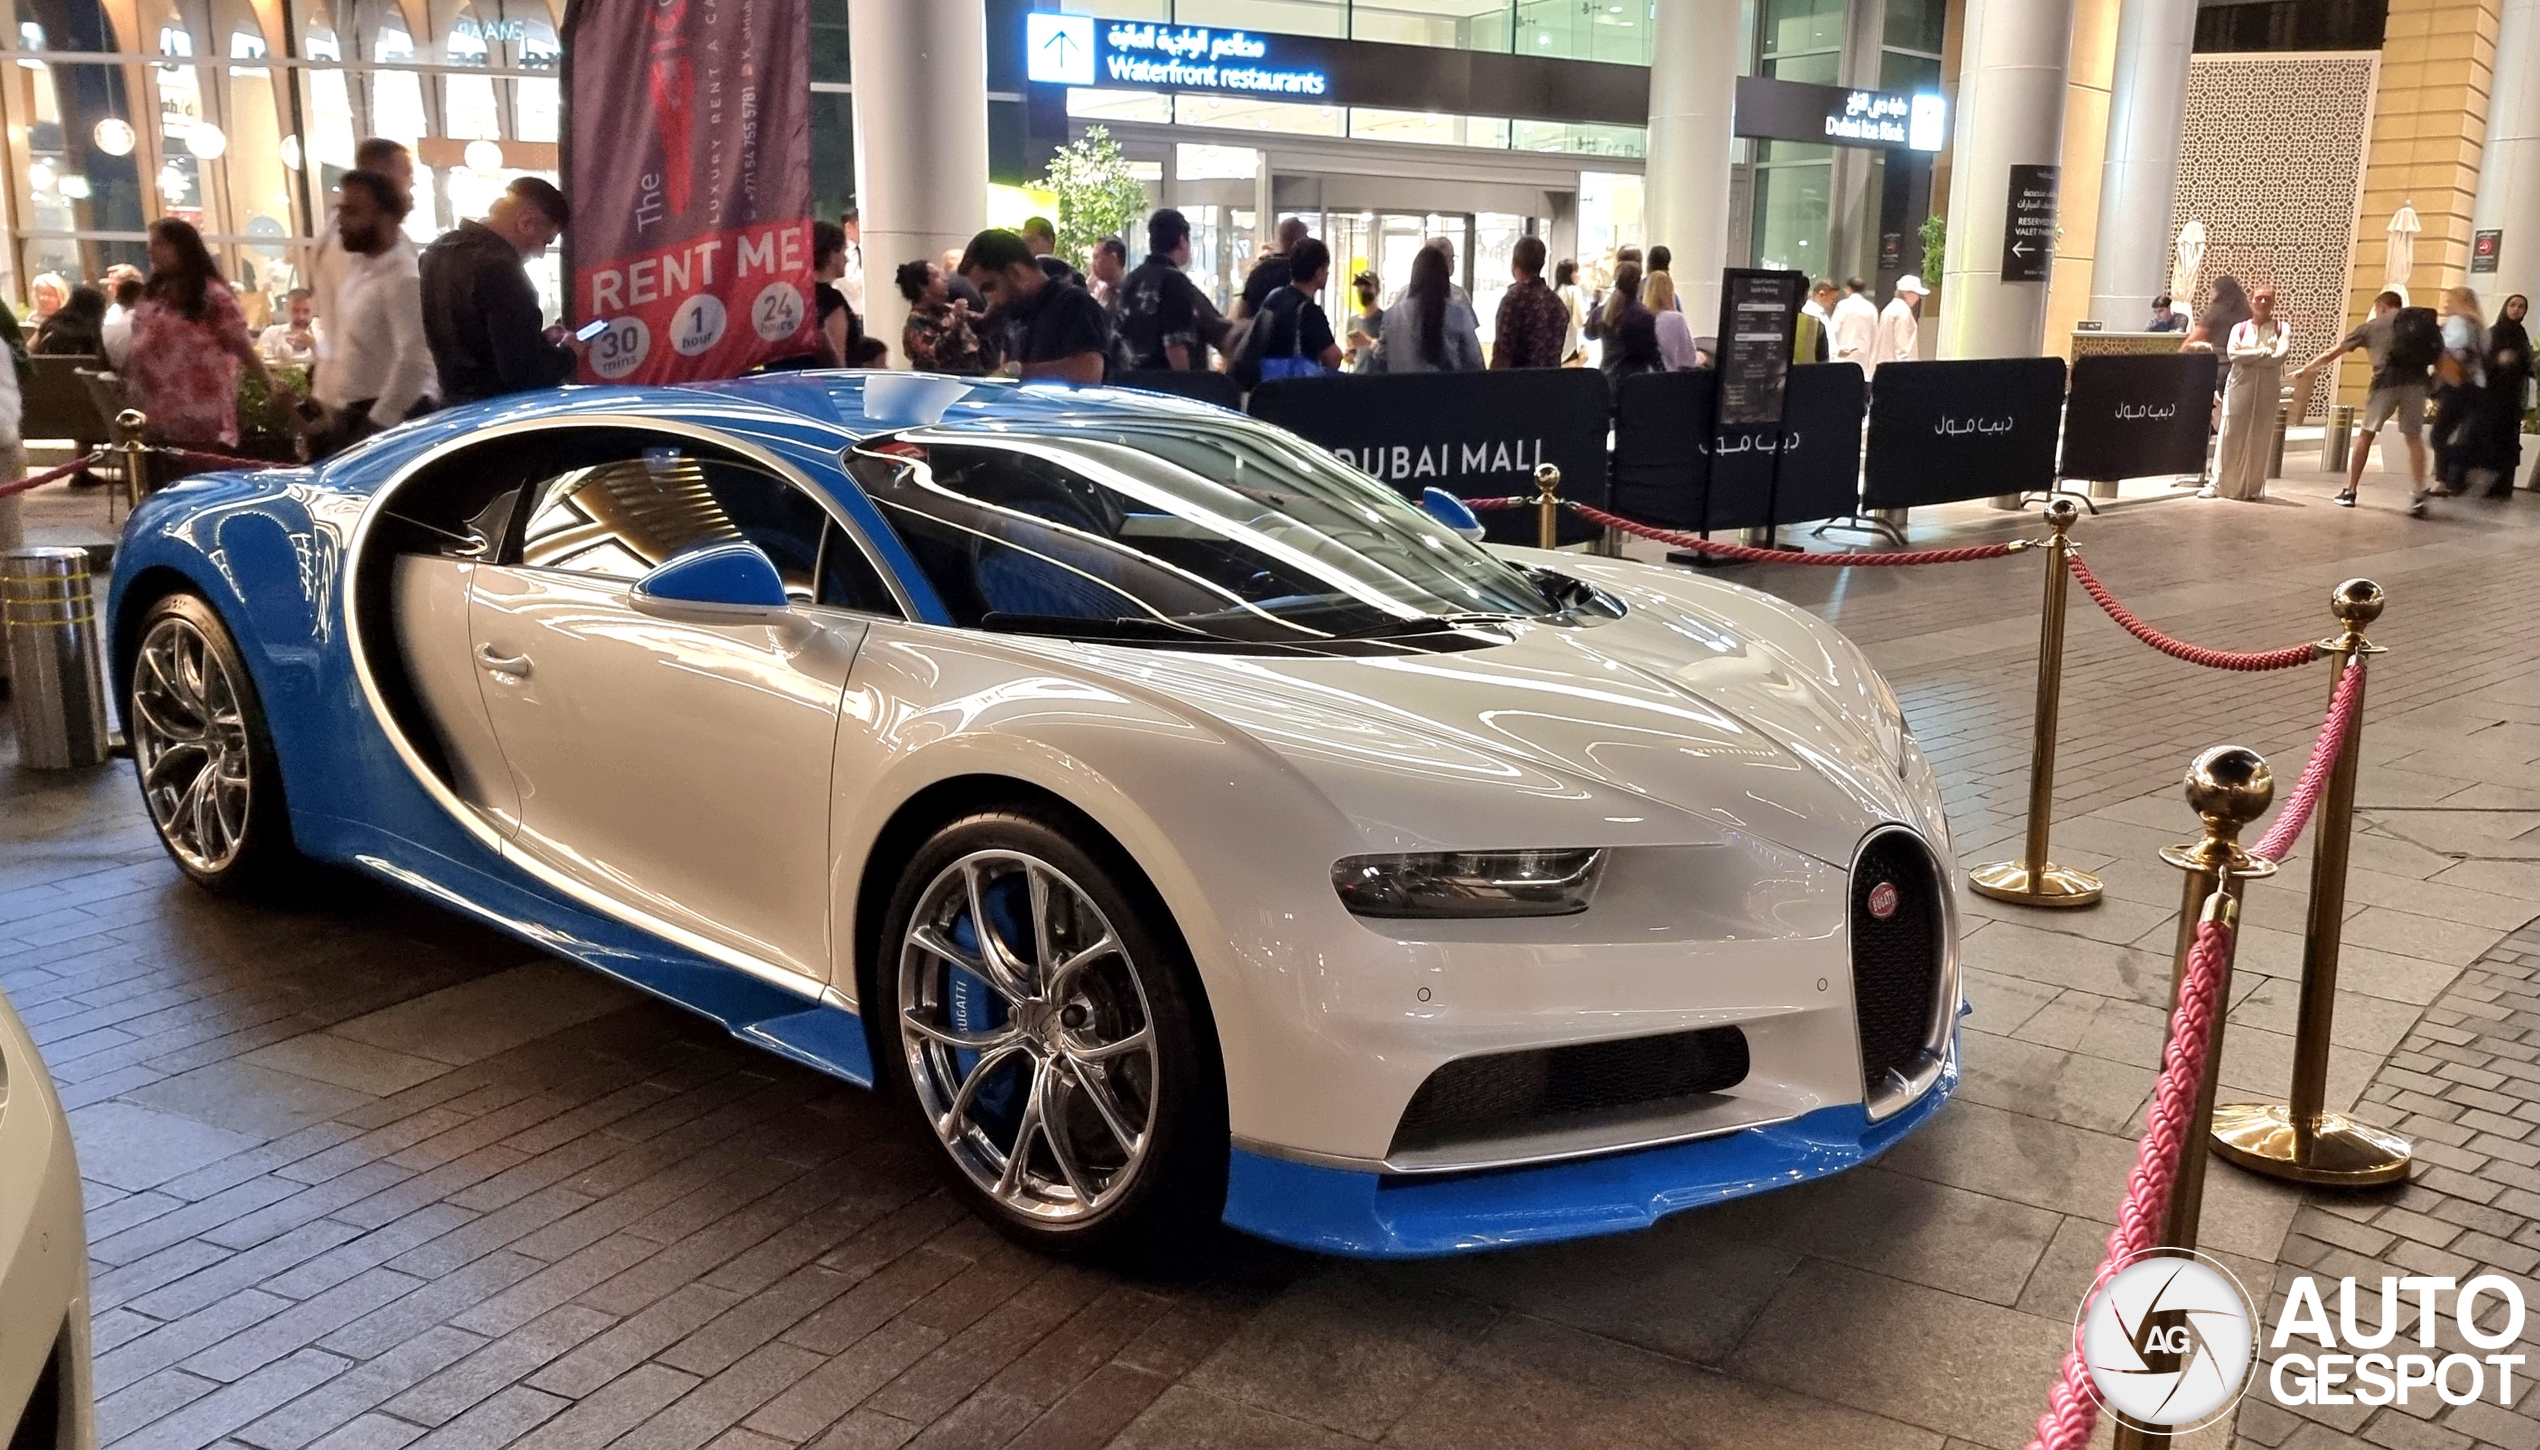 Is this the most beautiful Chiron?